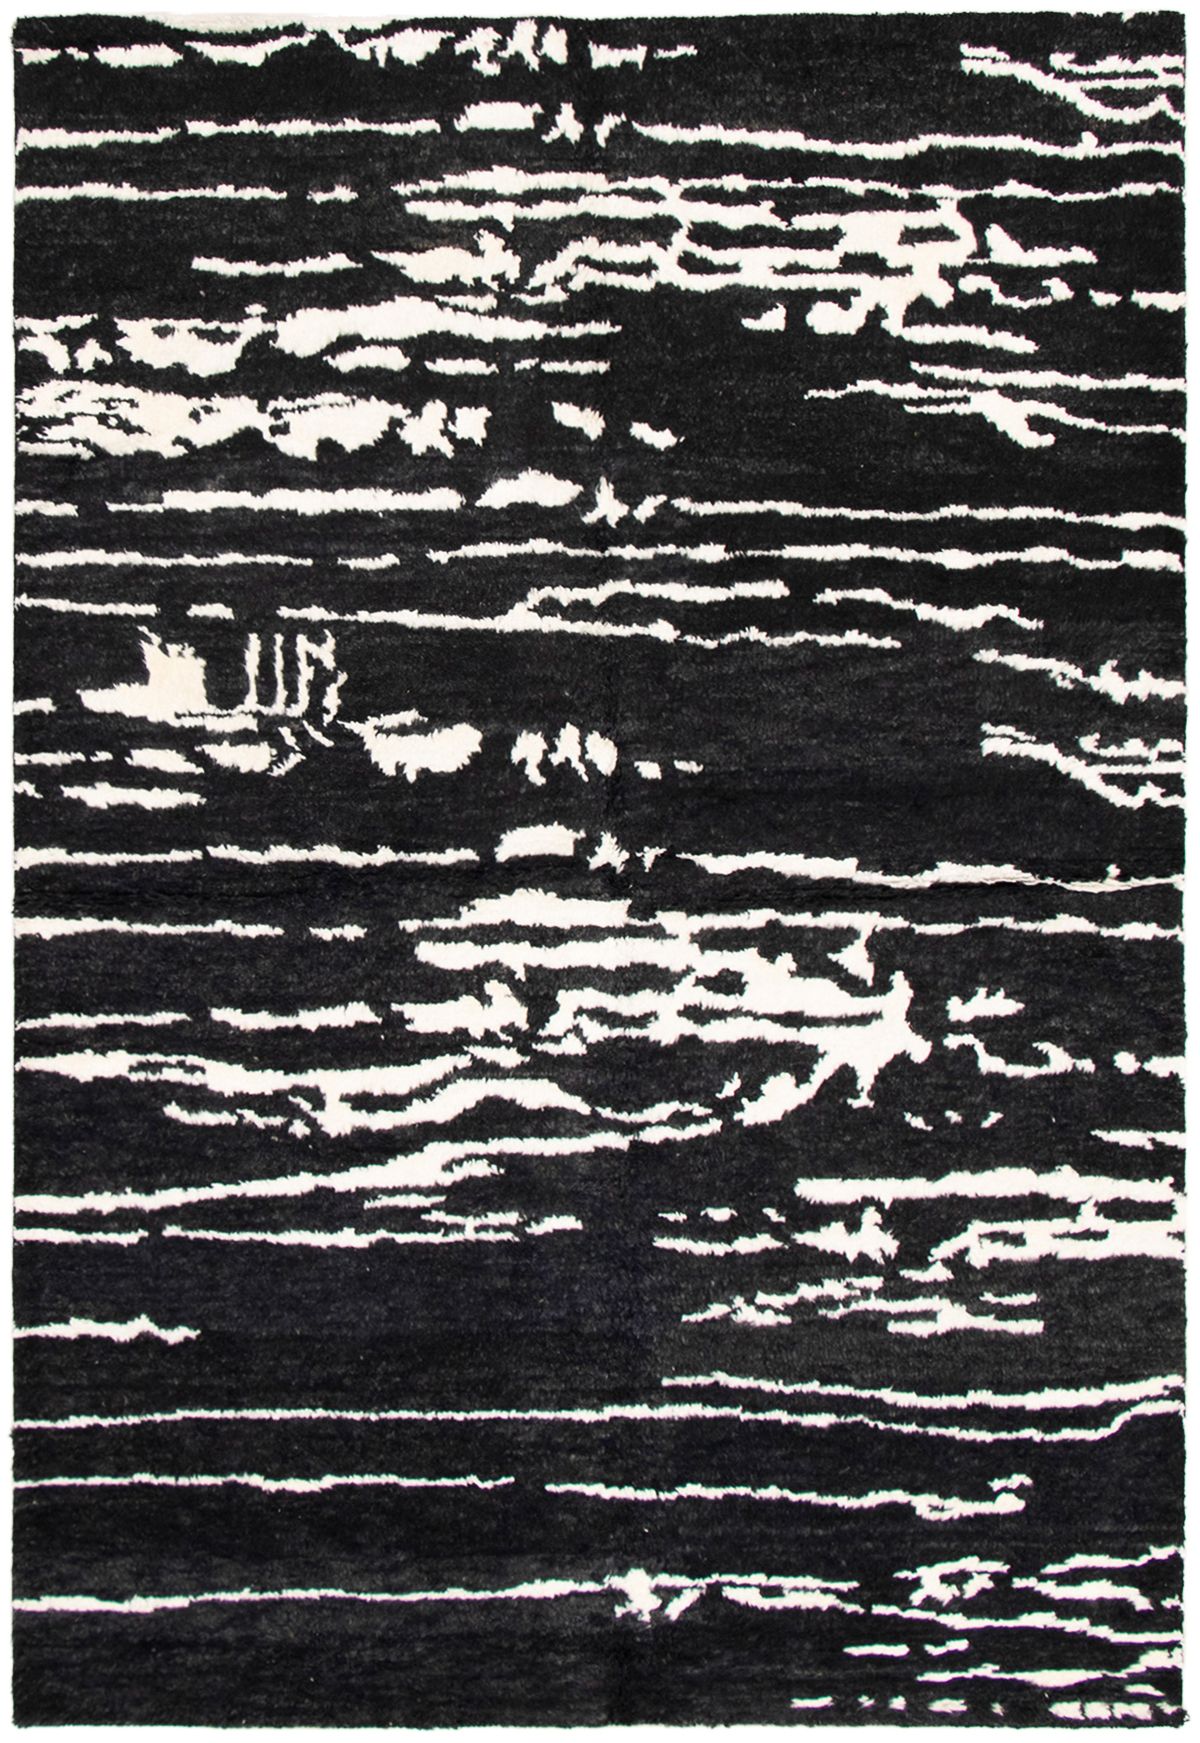 Hand-knotted Arlequin Black Wool/Silk Rug 6'2" x 9'1"  Size: 6'2" x 9'1"  